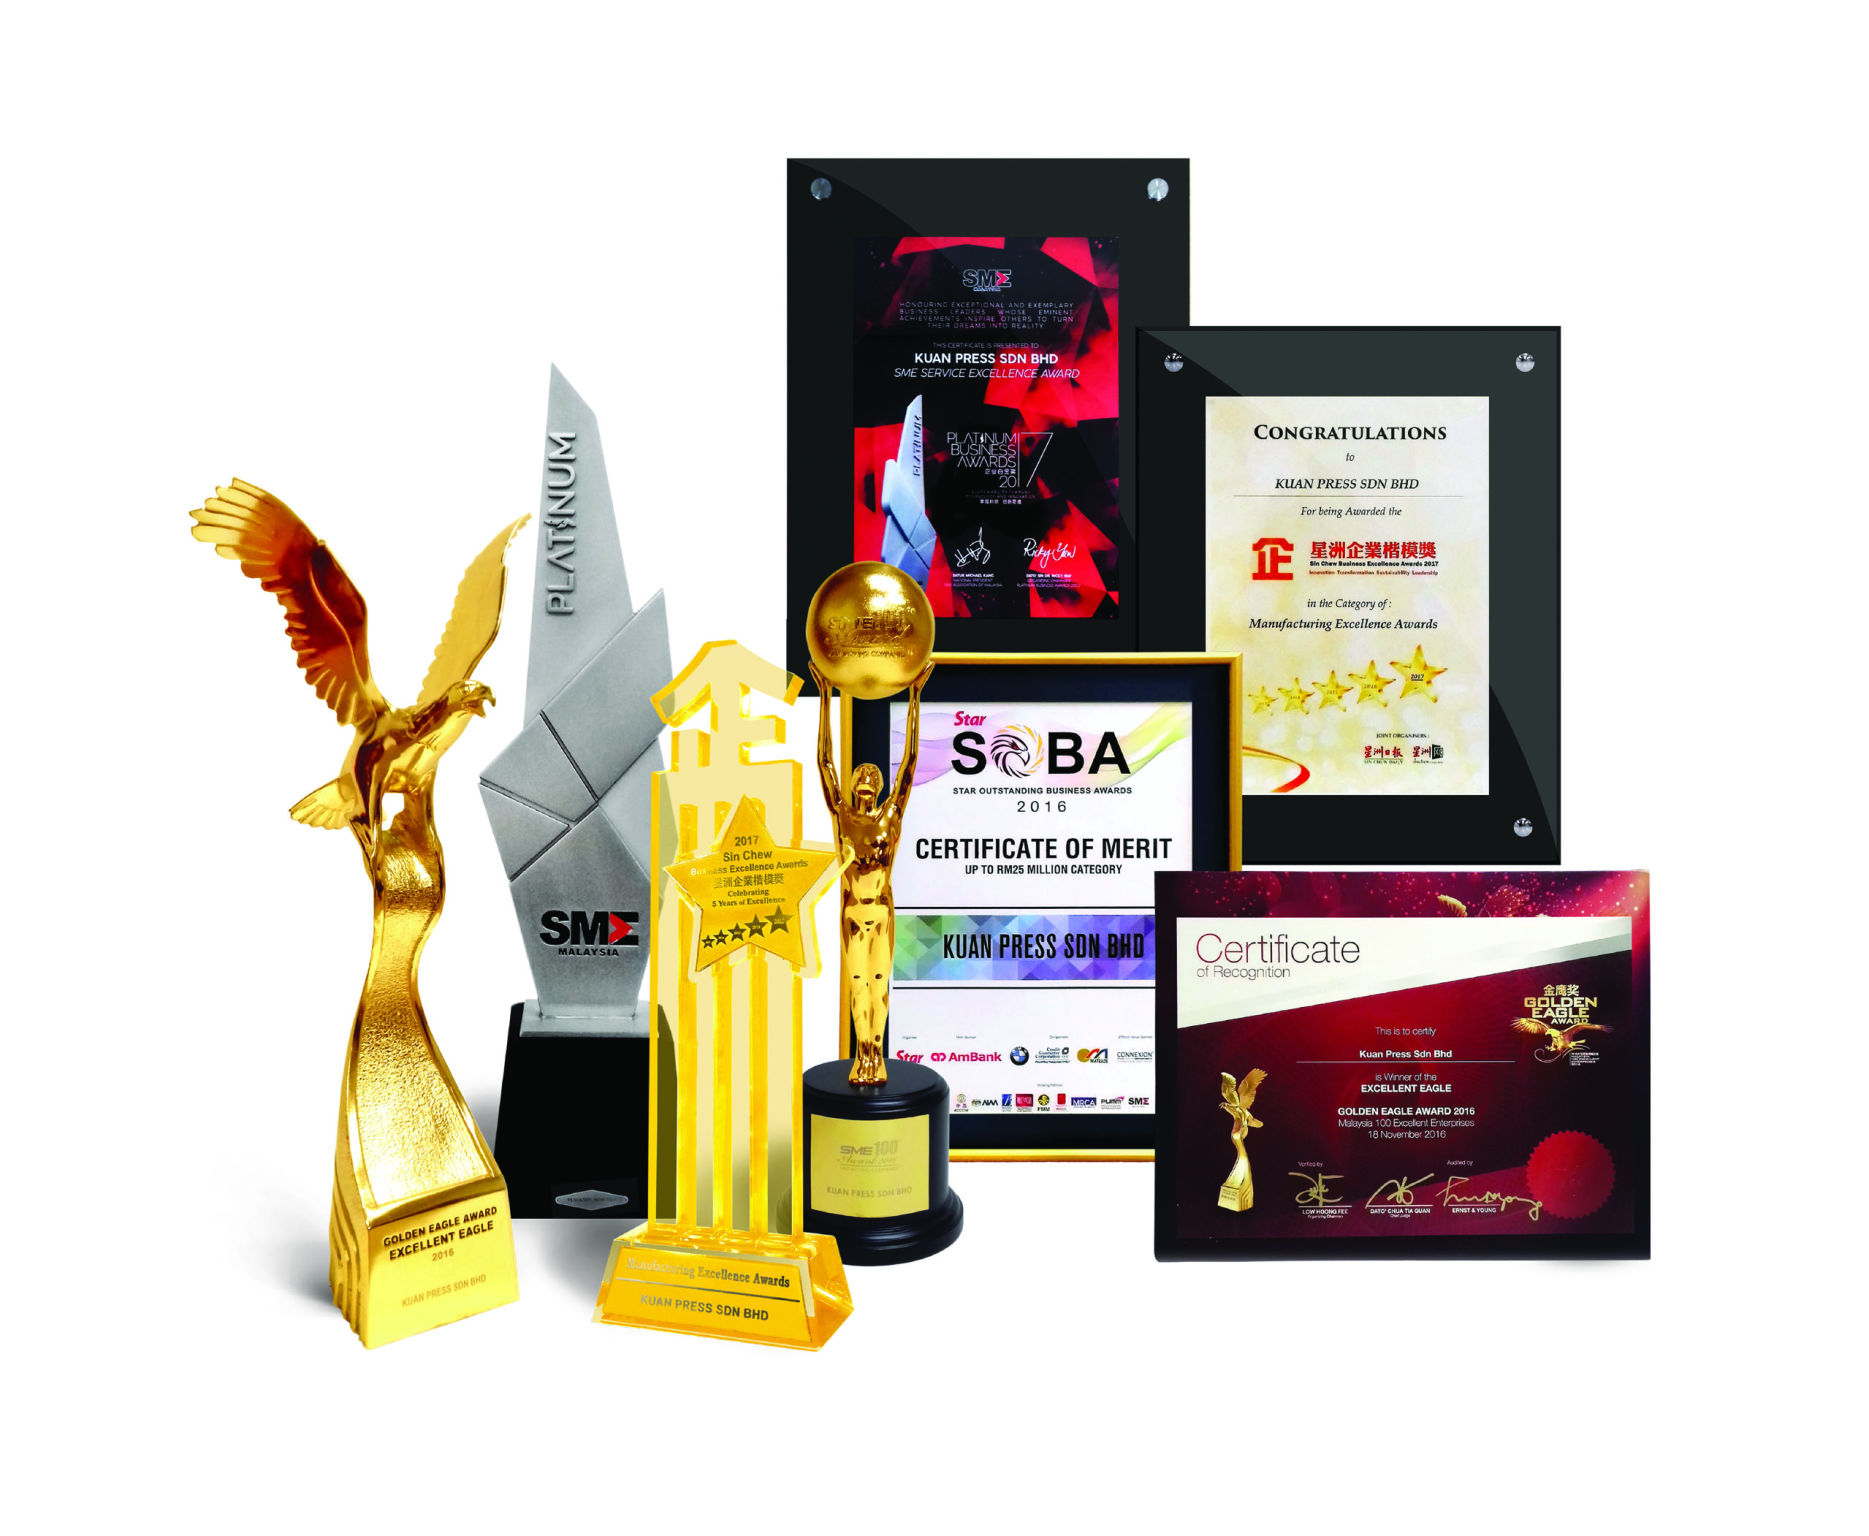 Awards Received by Kuan Press